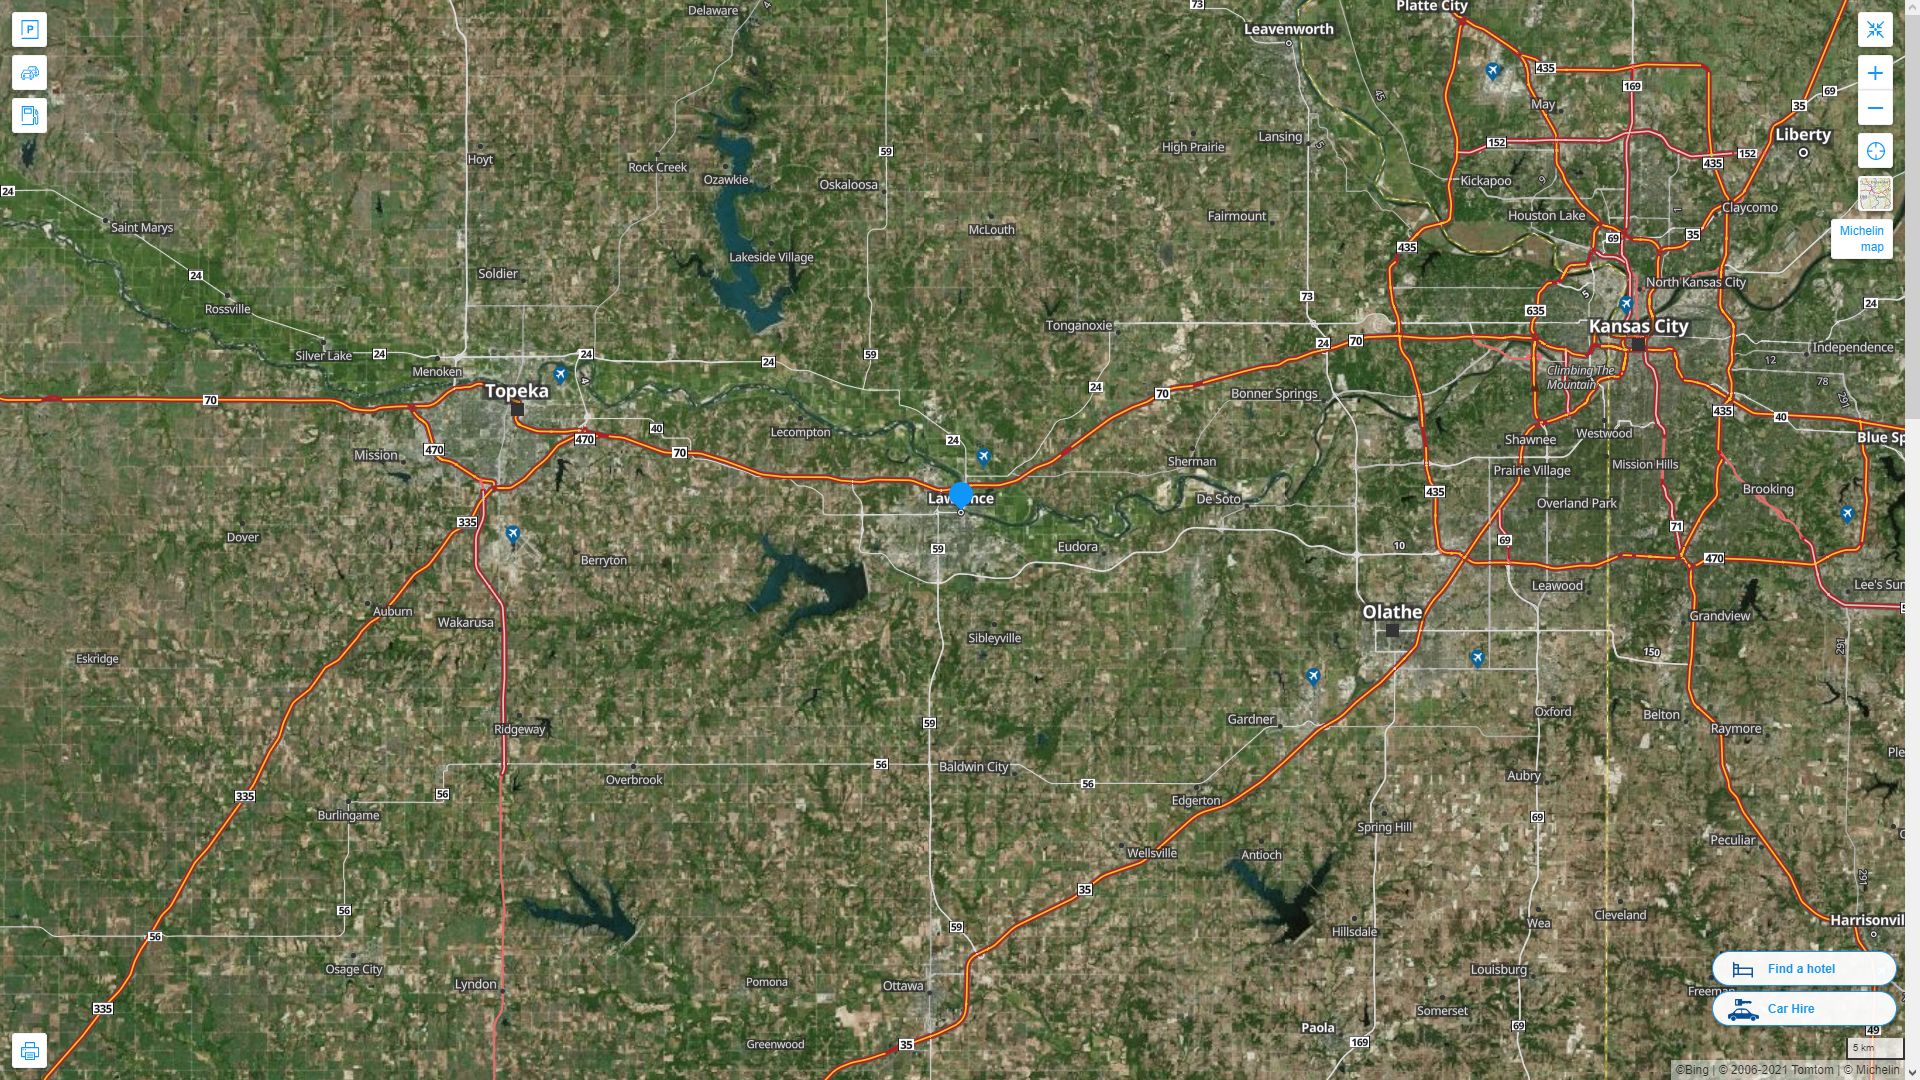 Lawrence Kansas Highway and Road Map with Satellite View